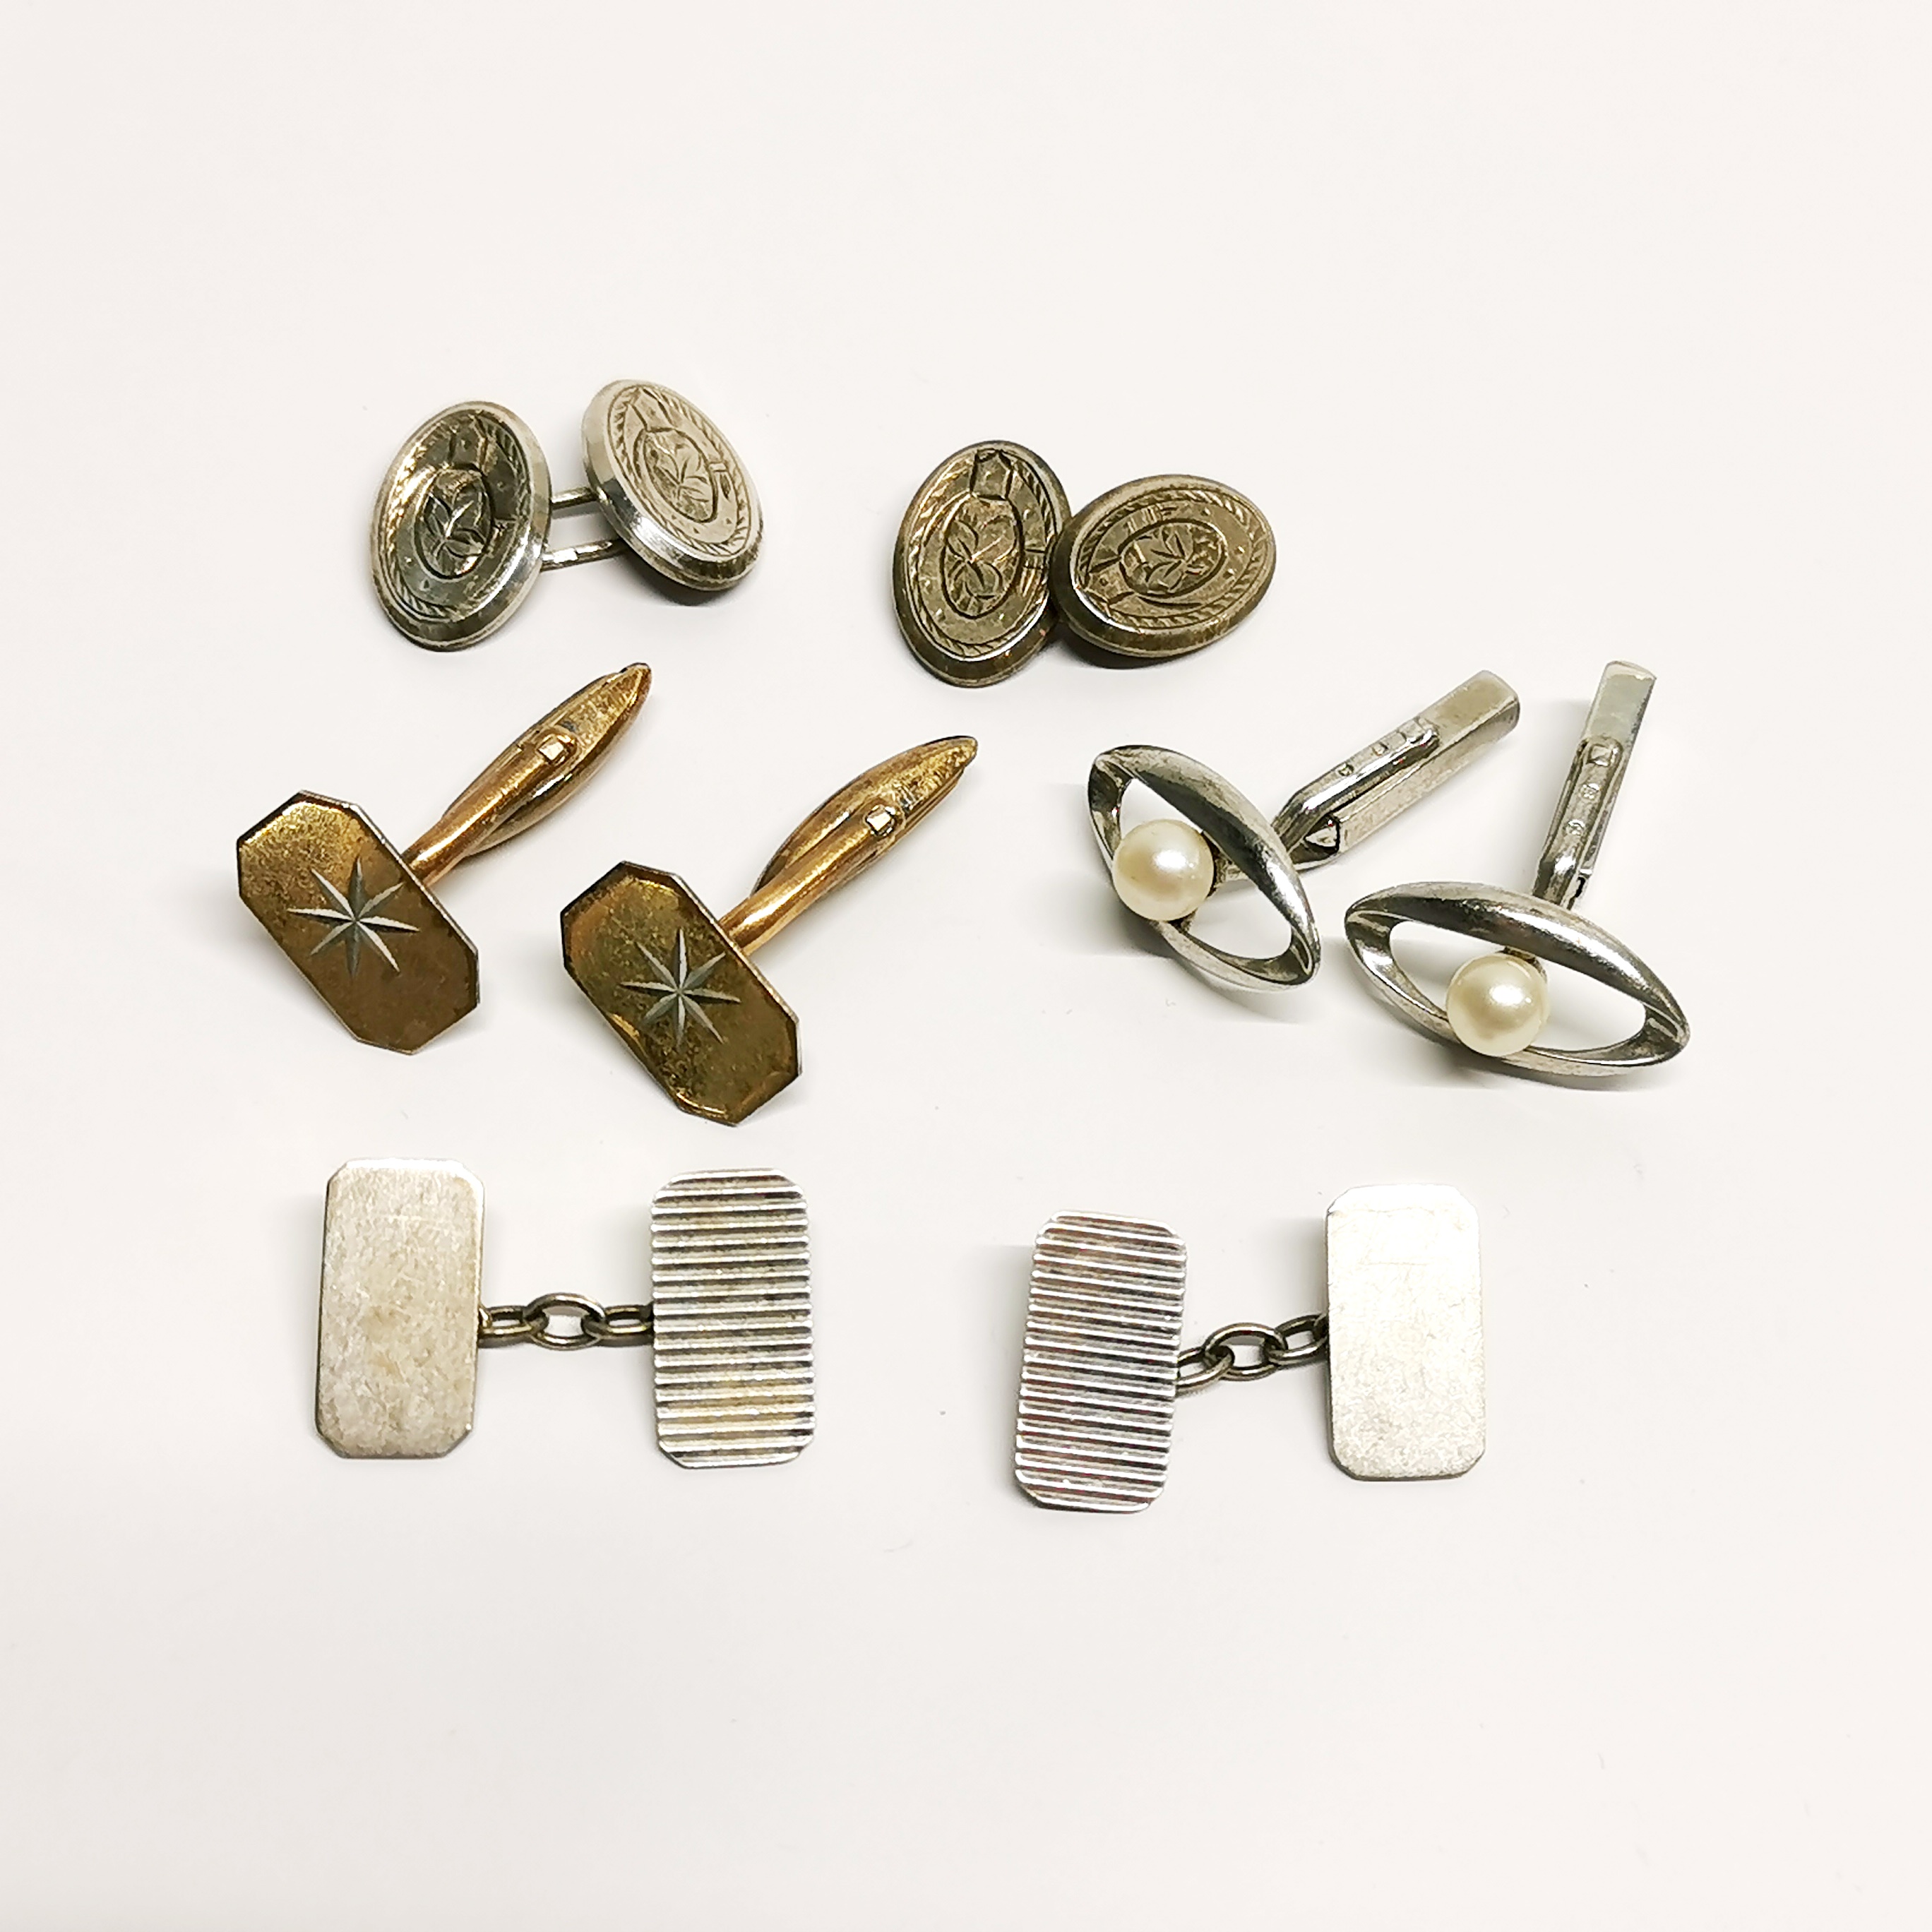 A group of vintage silver cufflinks.